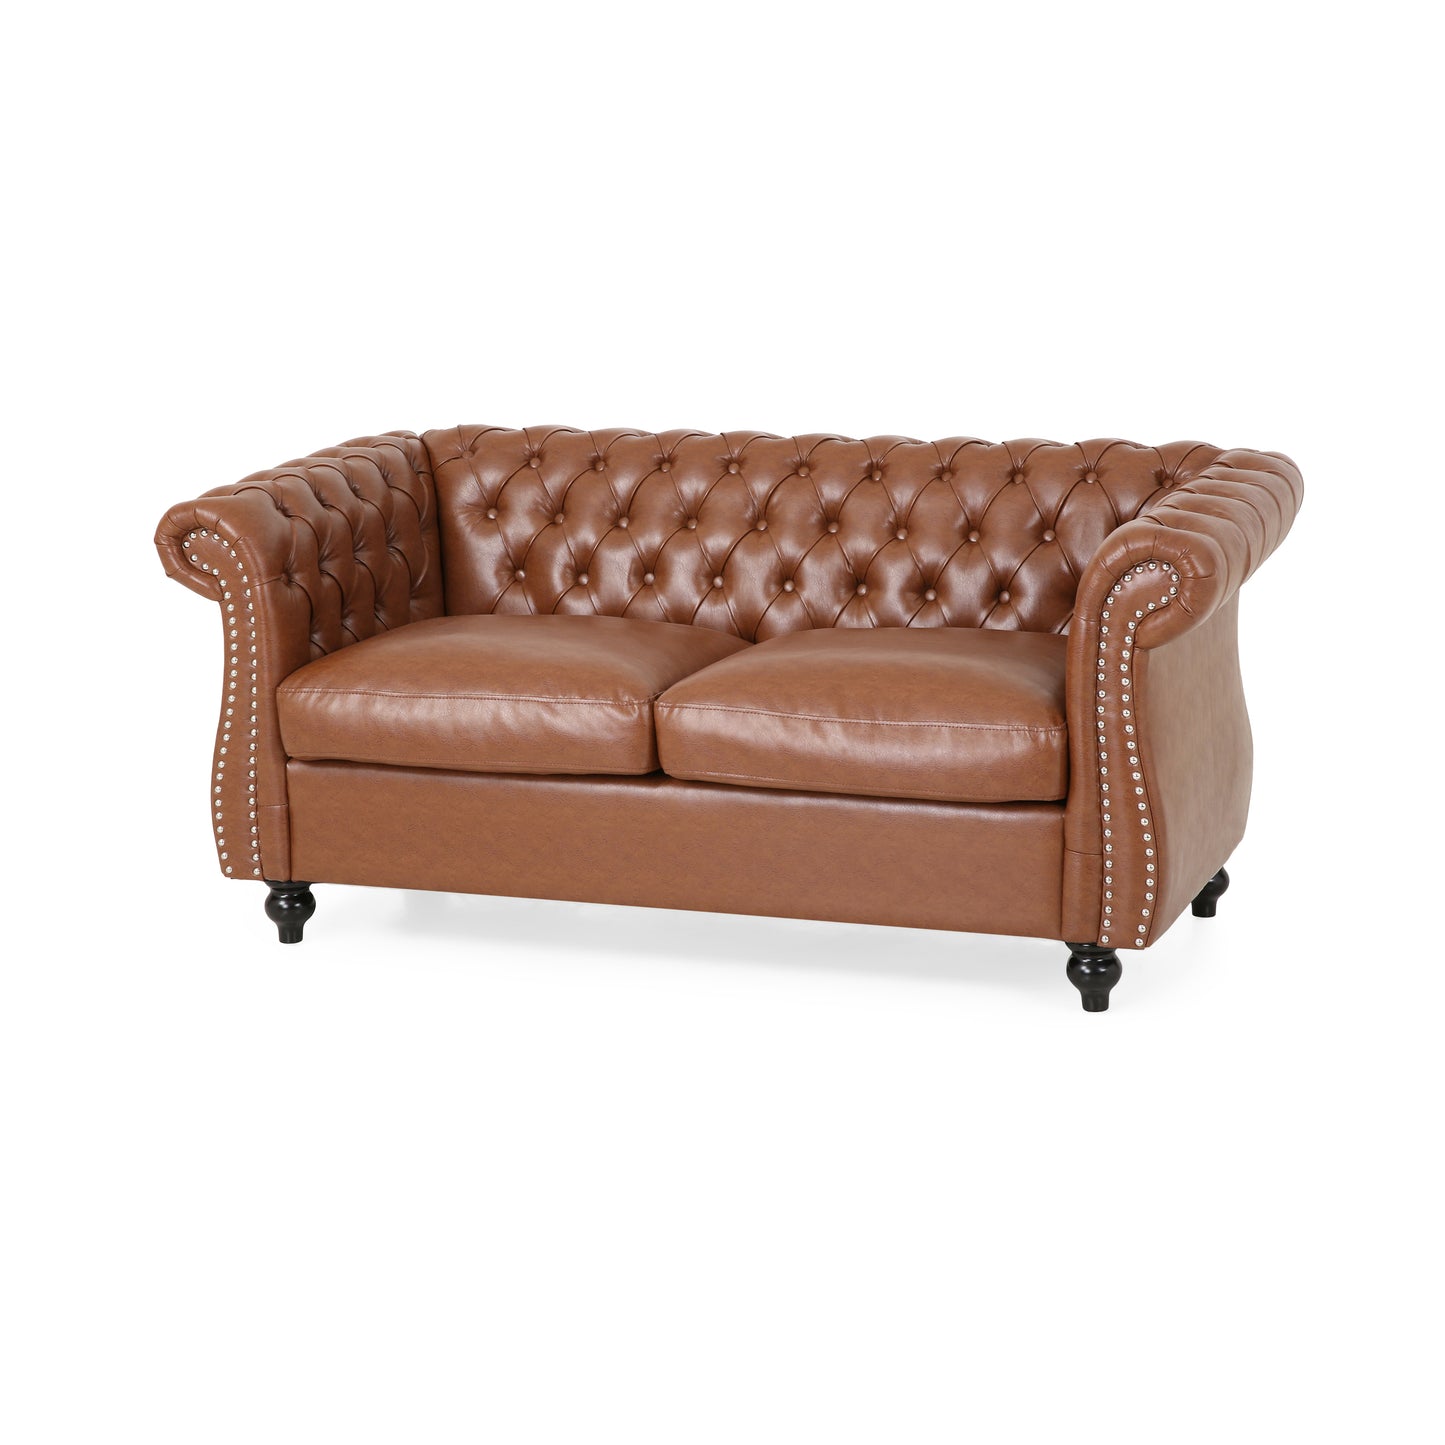 Madelena Traditional Chesterfield Loveseat